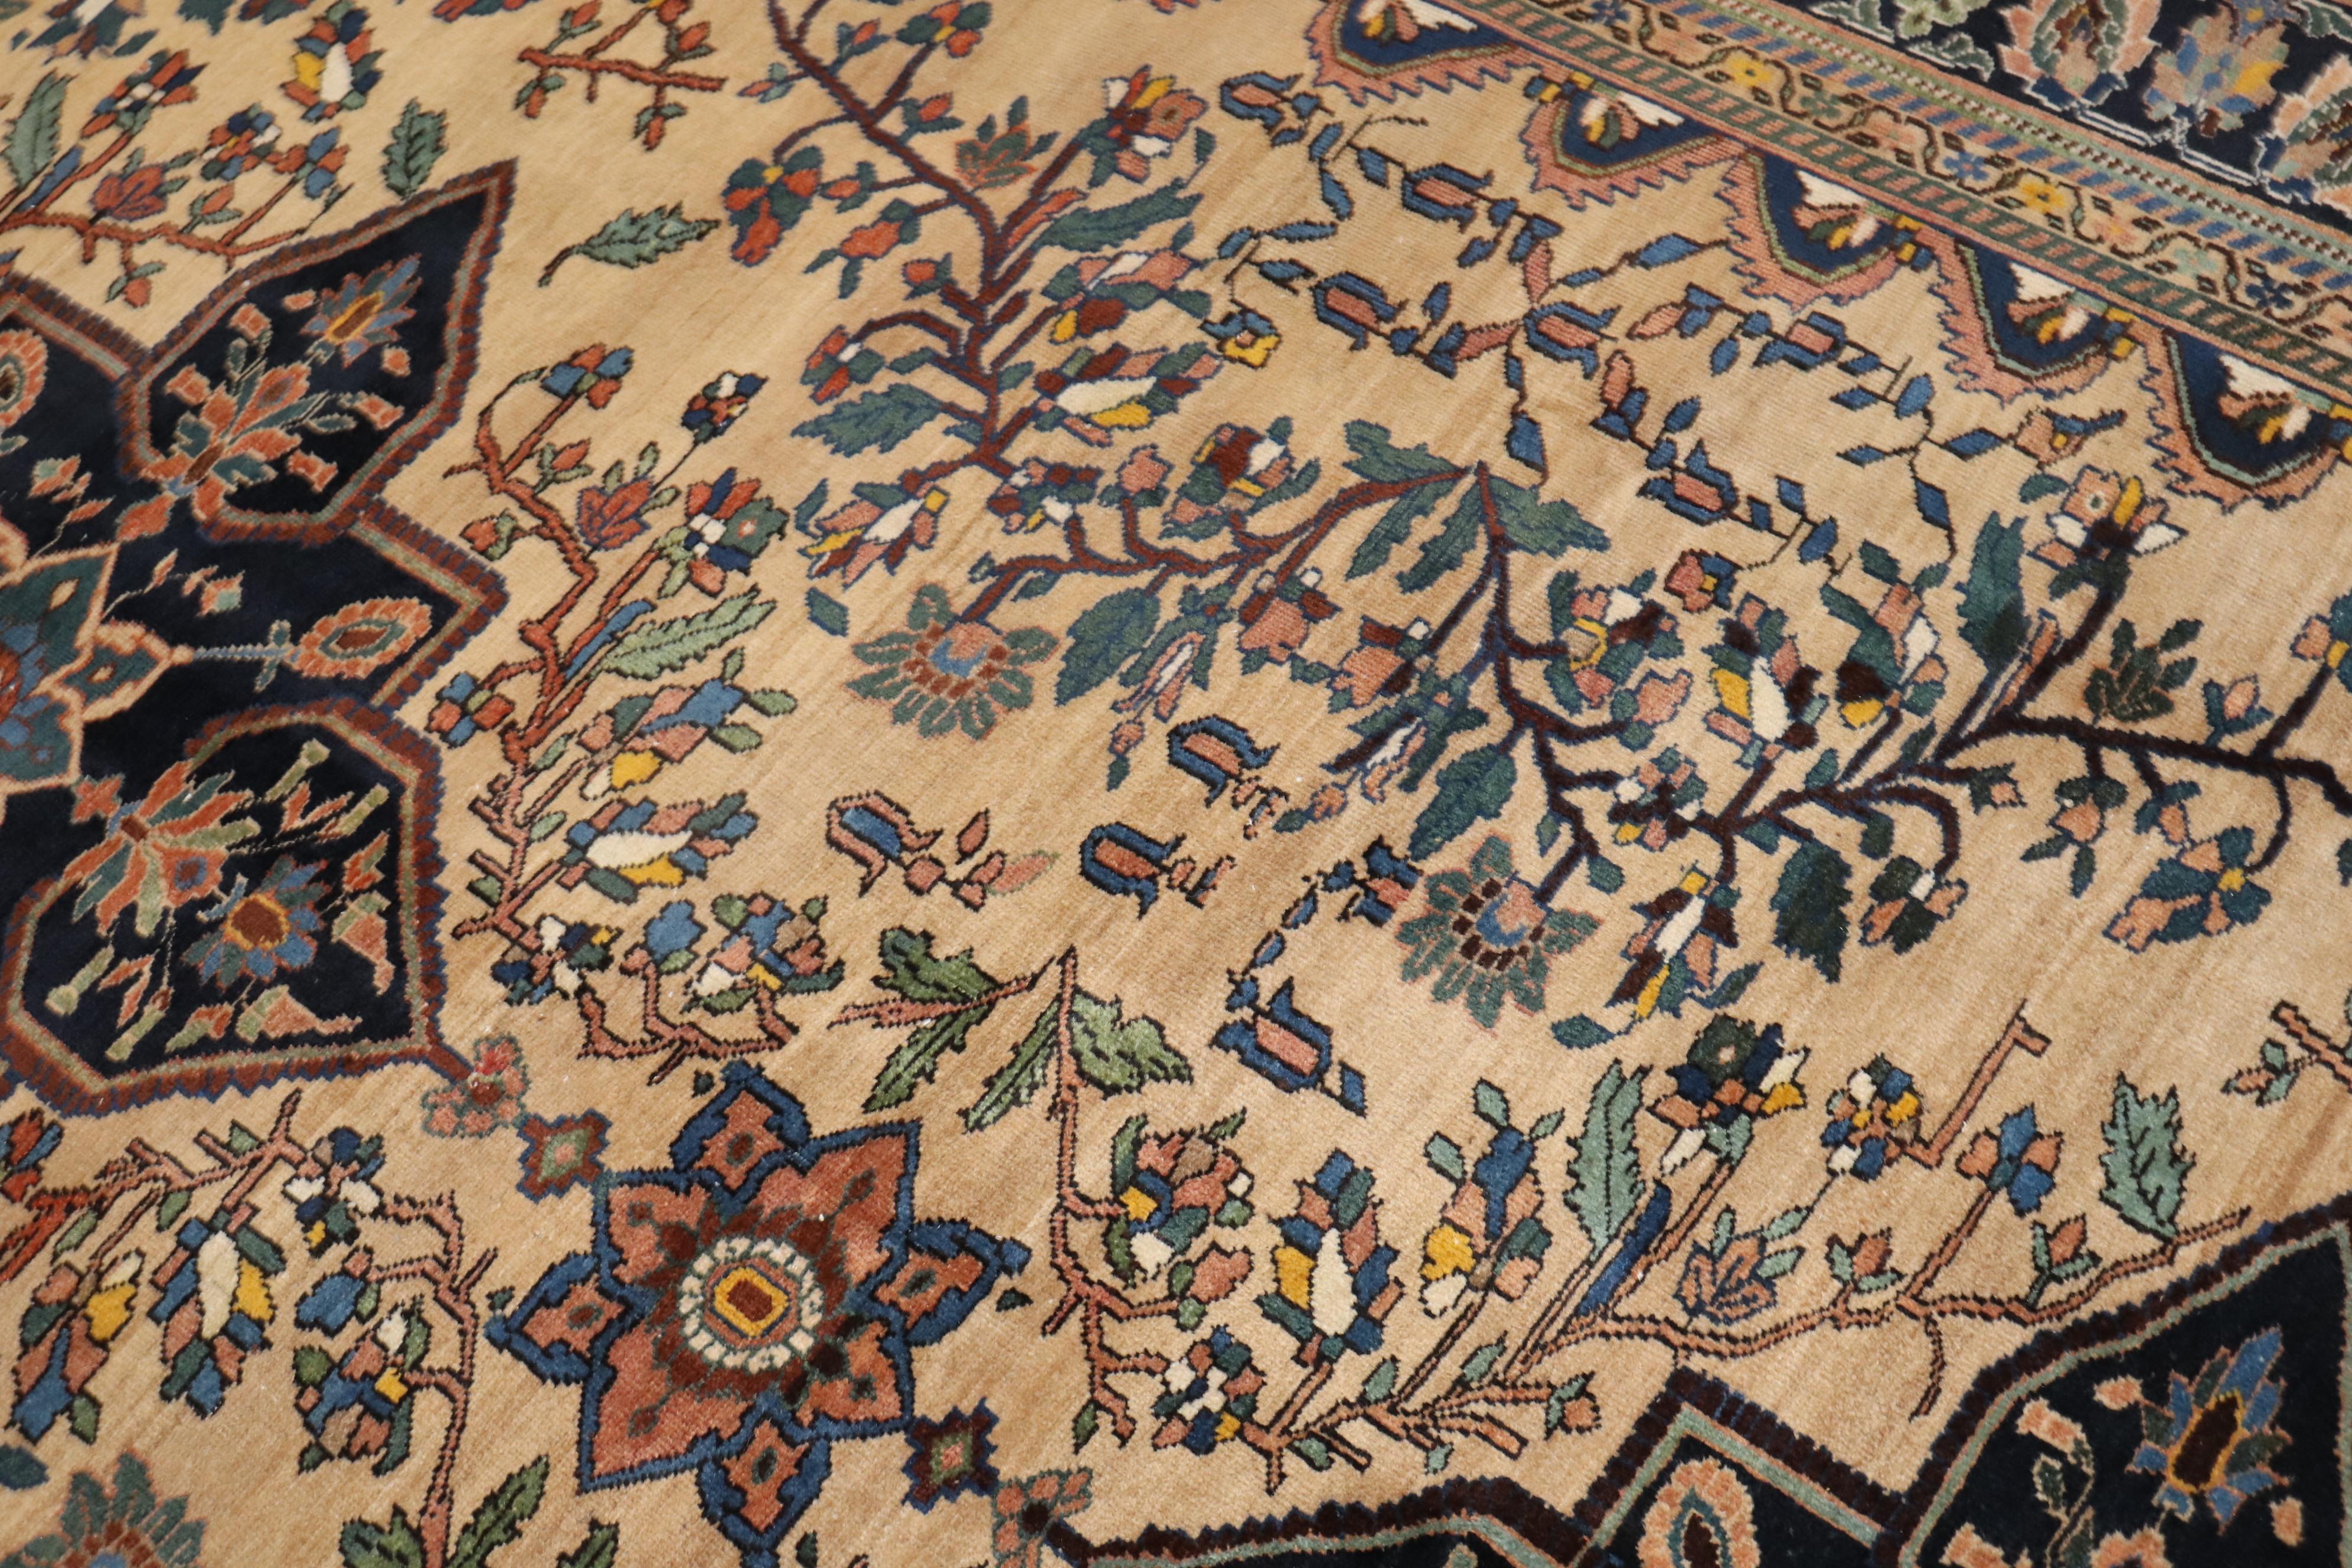 Zabihi Collection Early 20th Century Qashqai Rare Small Room Size Rug For Sale 3